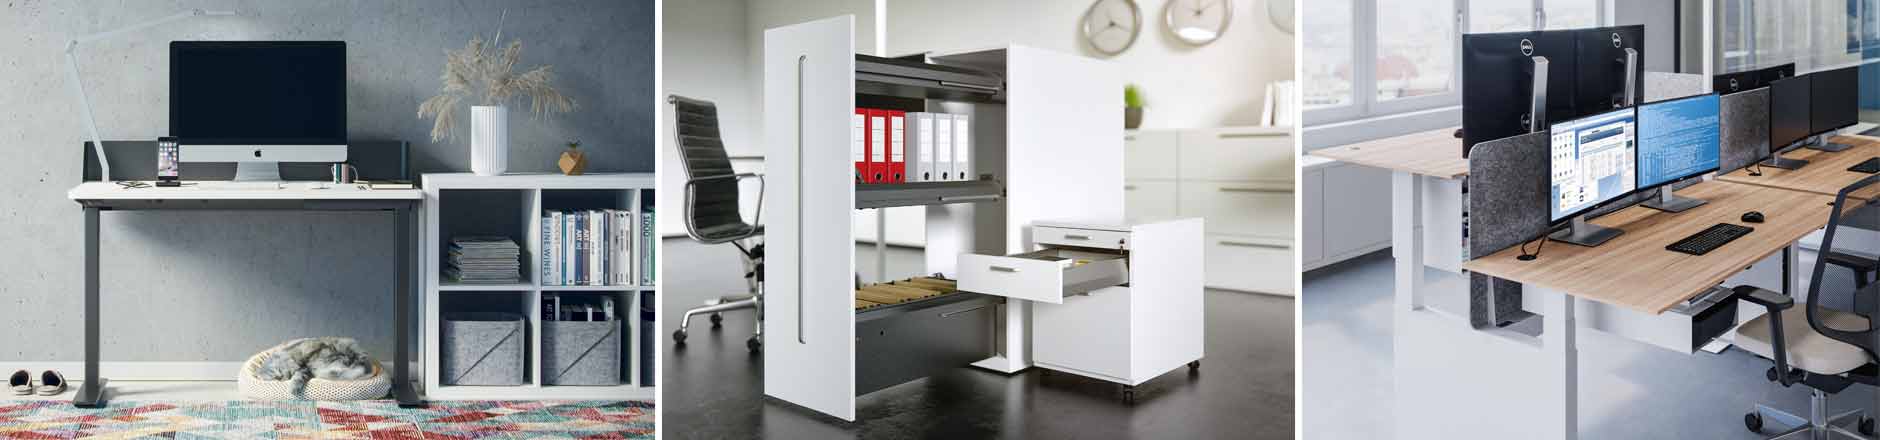 Office Fittings & Shop Fittings from Hafele